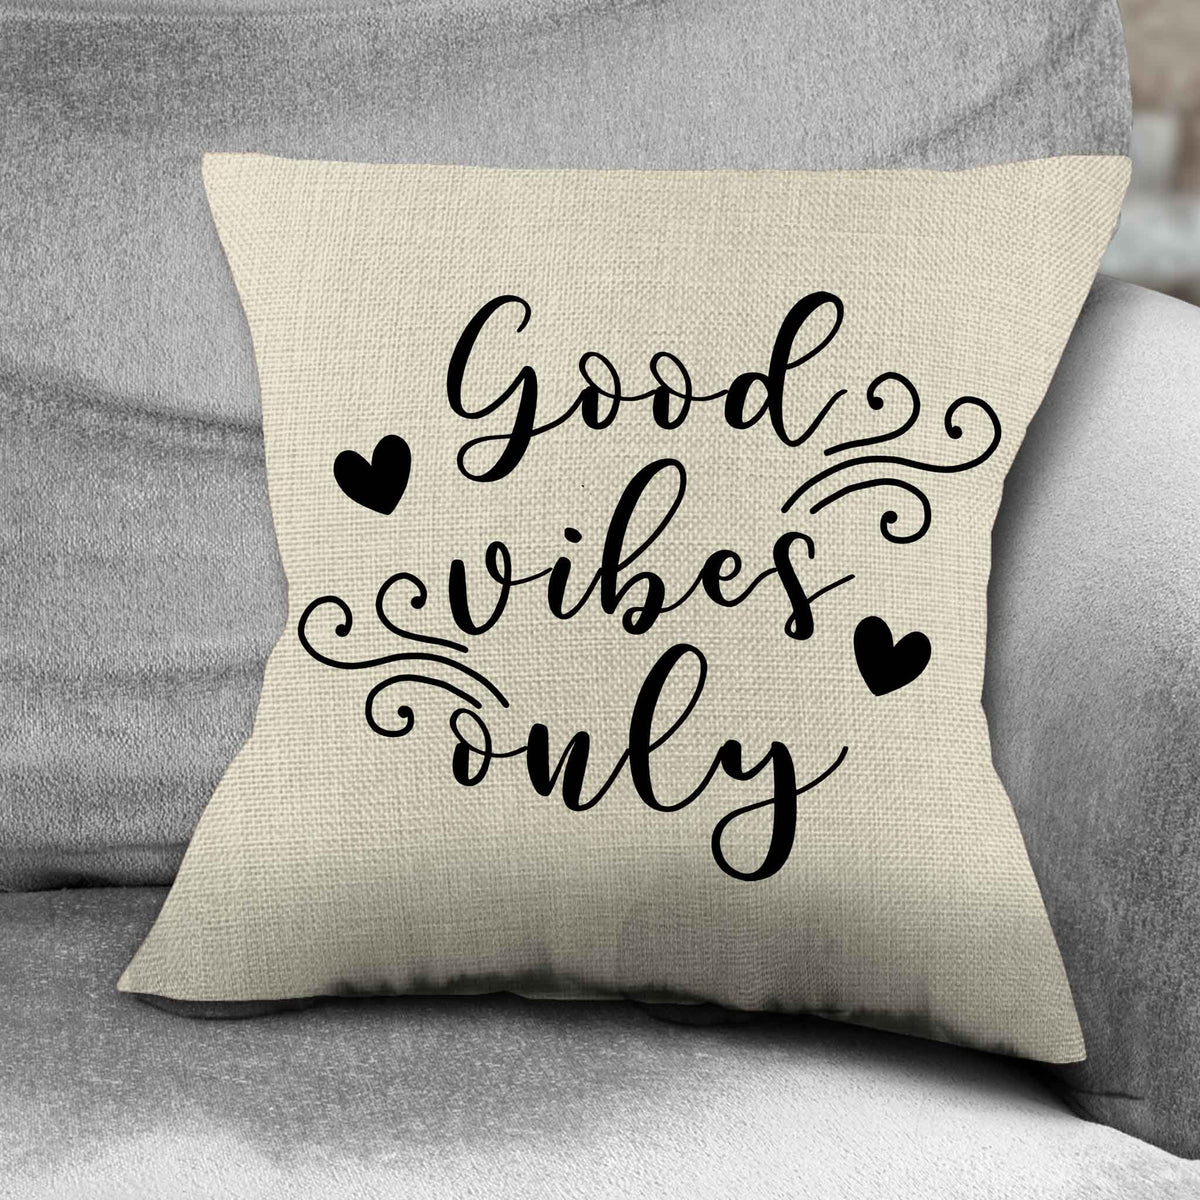 Personalized Throw Pillow | Custom Decorative Pillow | Good Vibes Only